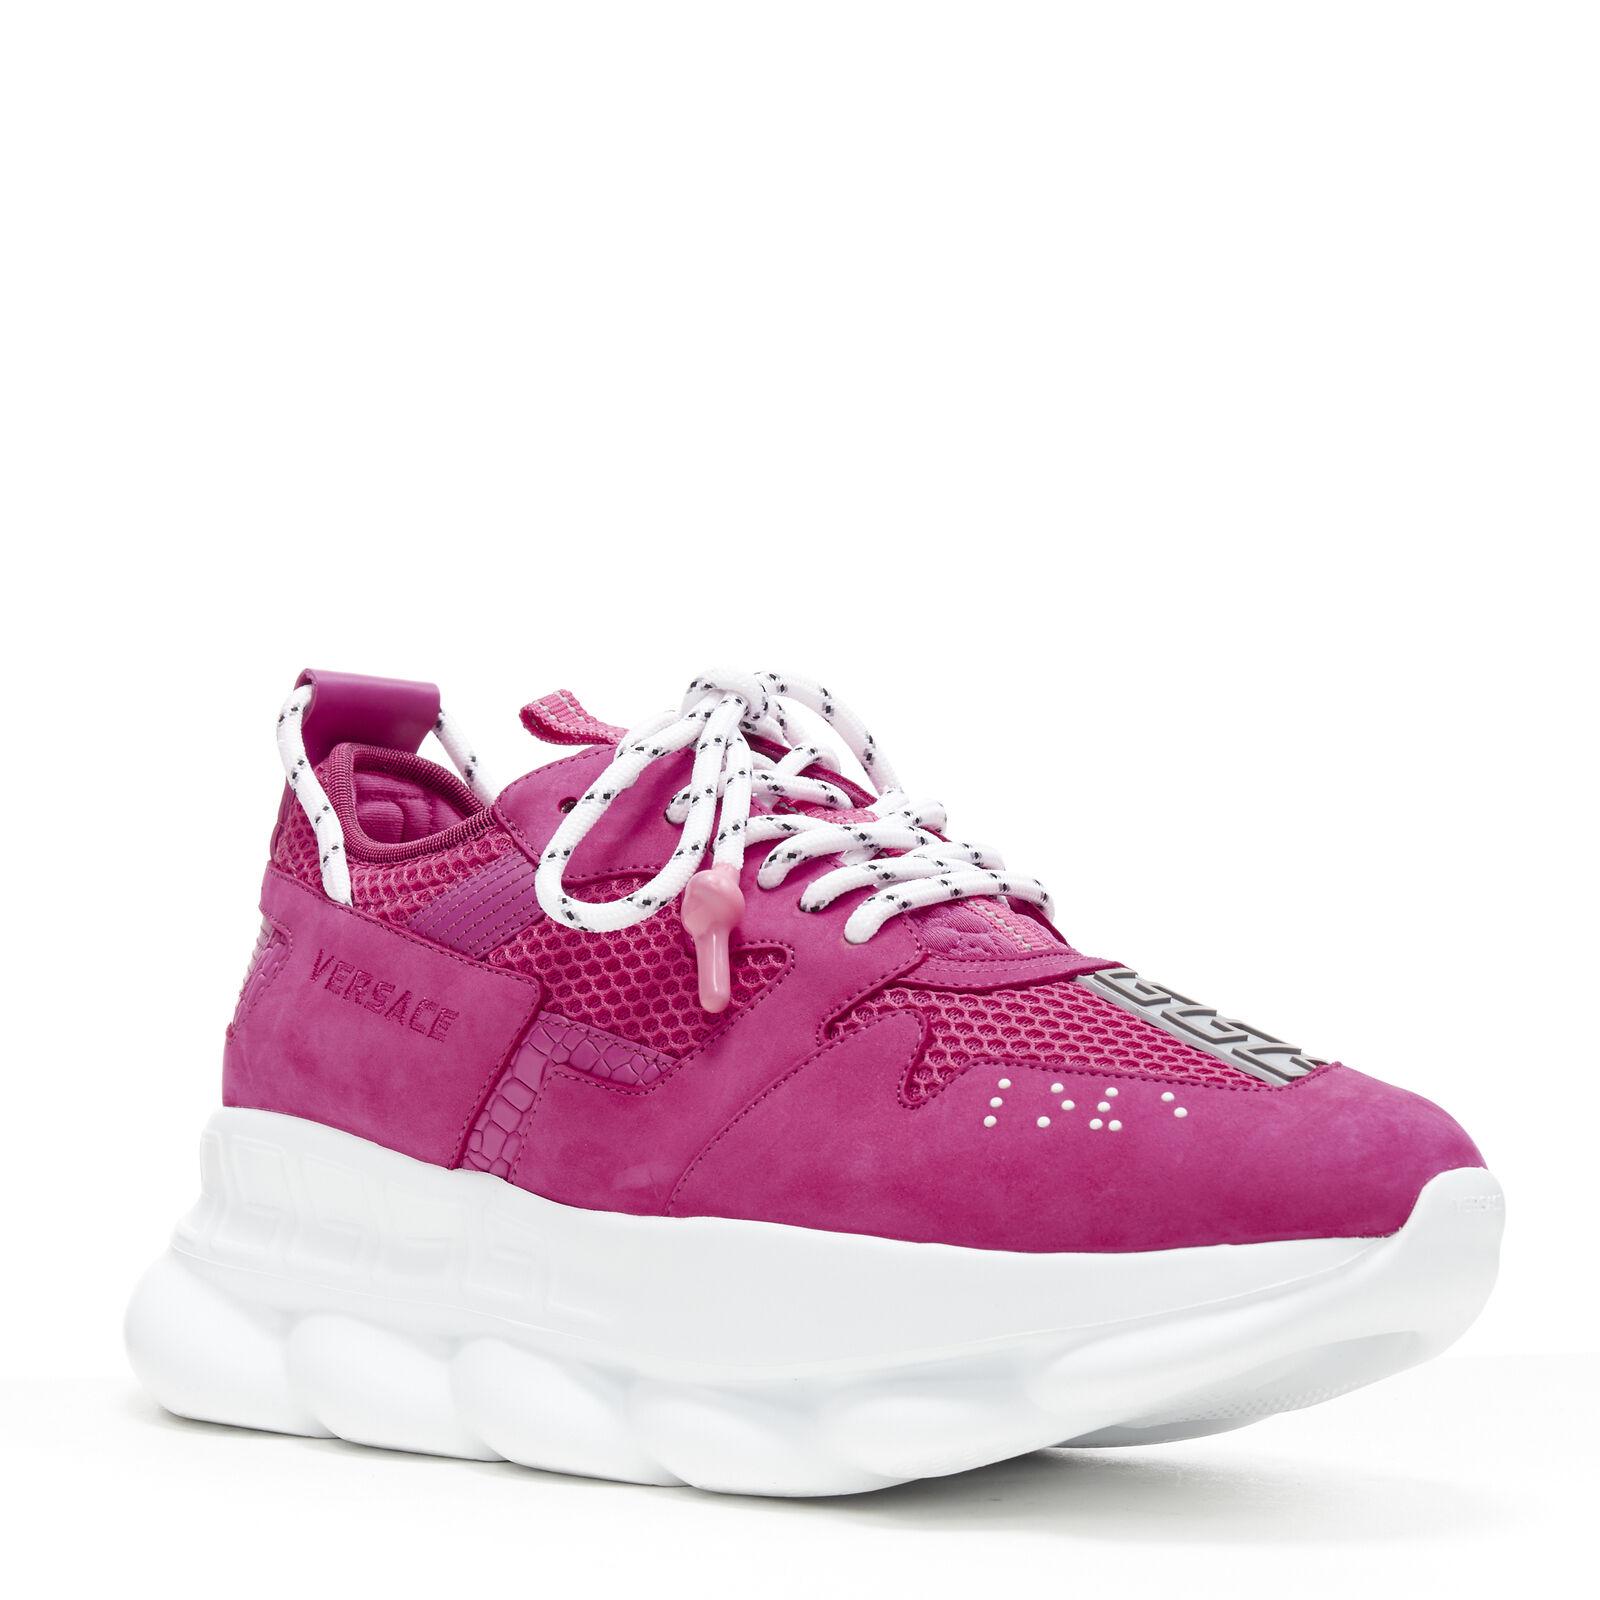 new VERSACE Chain Reaction Blowzy all pink suede low top chunky sneaker EU40.5
Reference: TGAS/B01205
Brand: Versace-Versace
Designer: Salehe Bembury
Model: Versace Chain Reaction
Material: Fabric, Leather
Color: Pink
Pattern: Solid
Closure: Lace